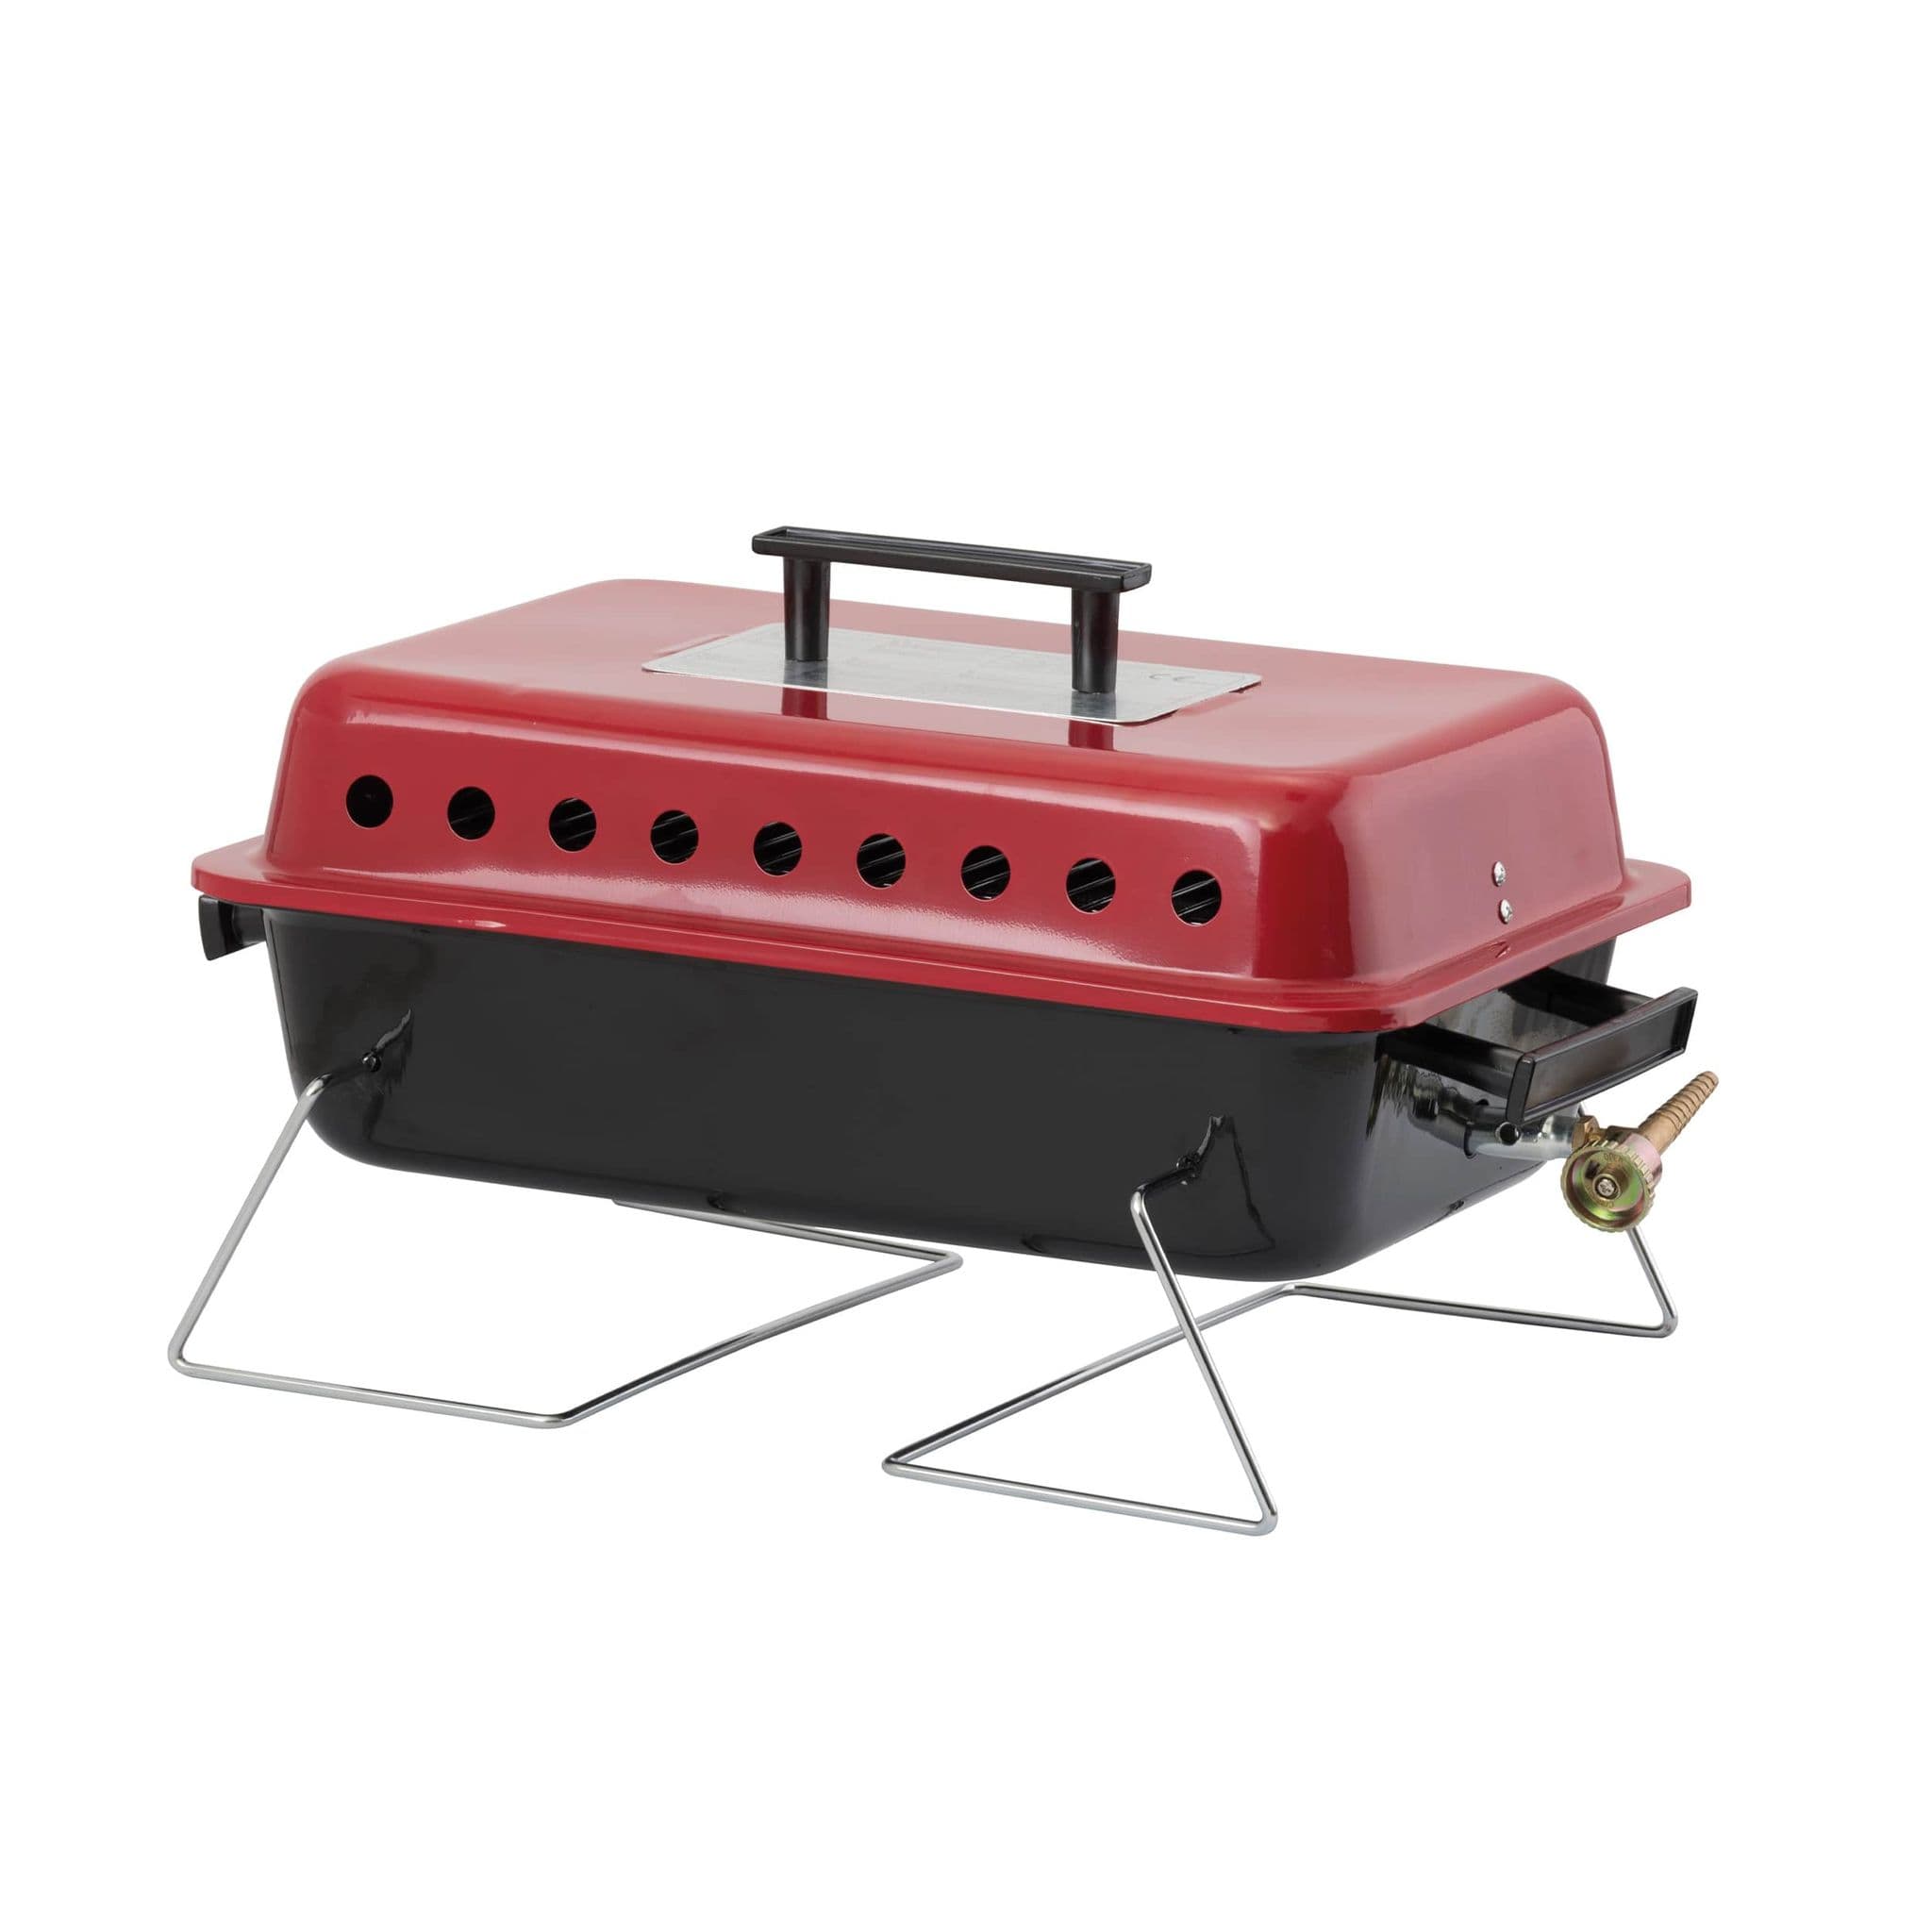 Lifestyle Portable Camping Gas BBQ JD Catering Equipment Solutions Ltd